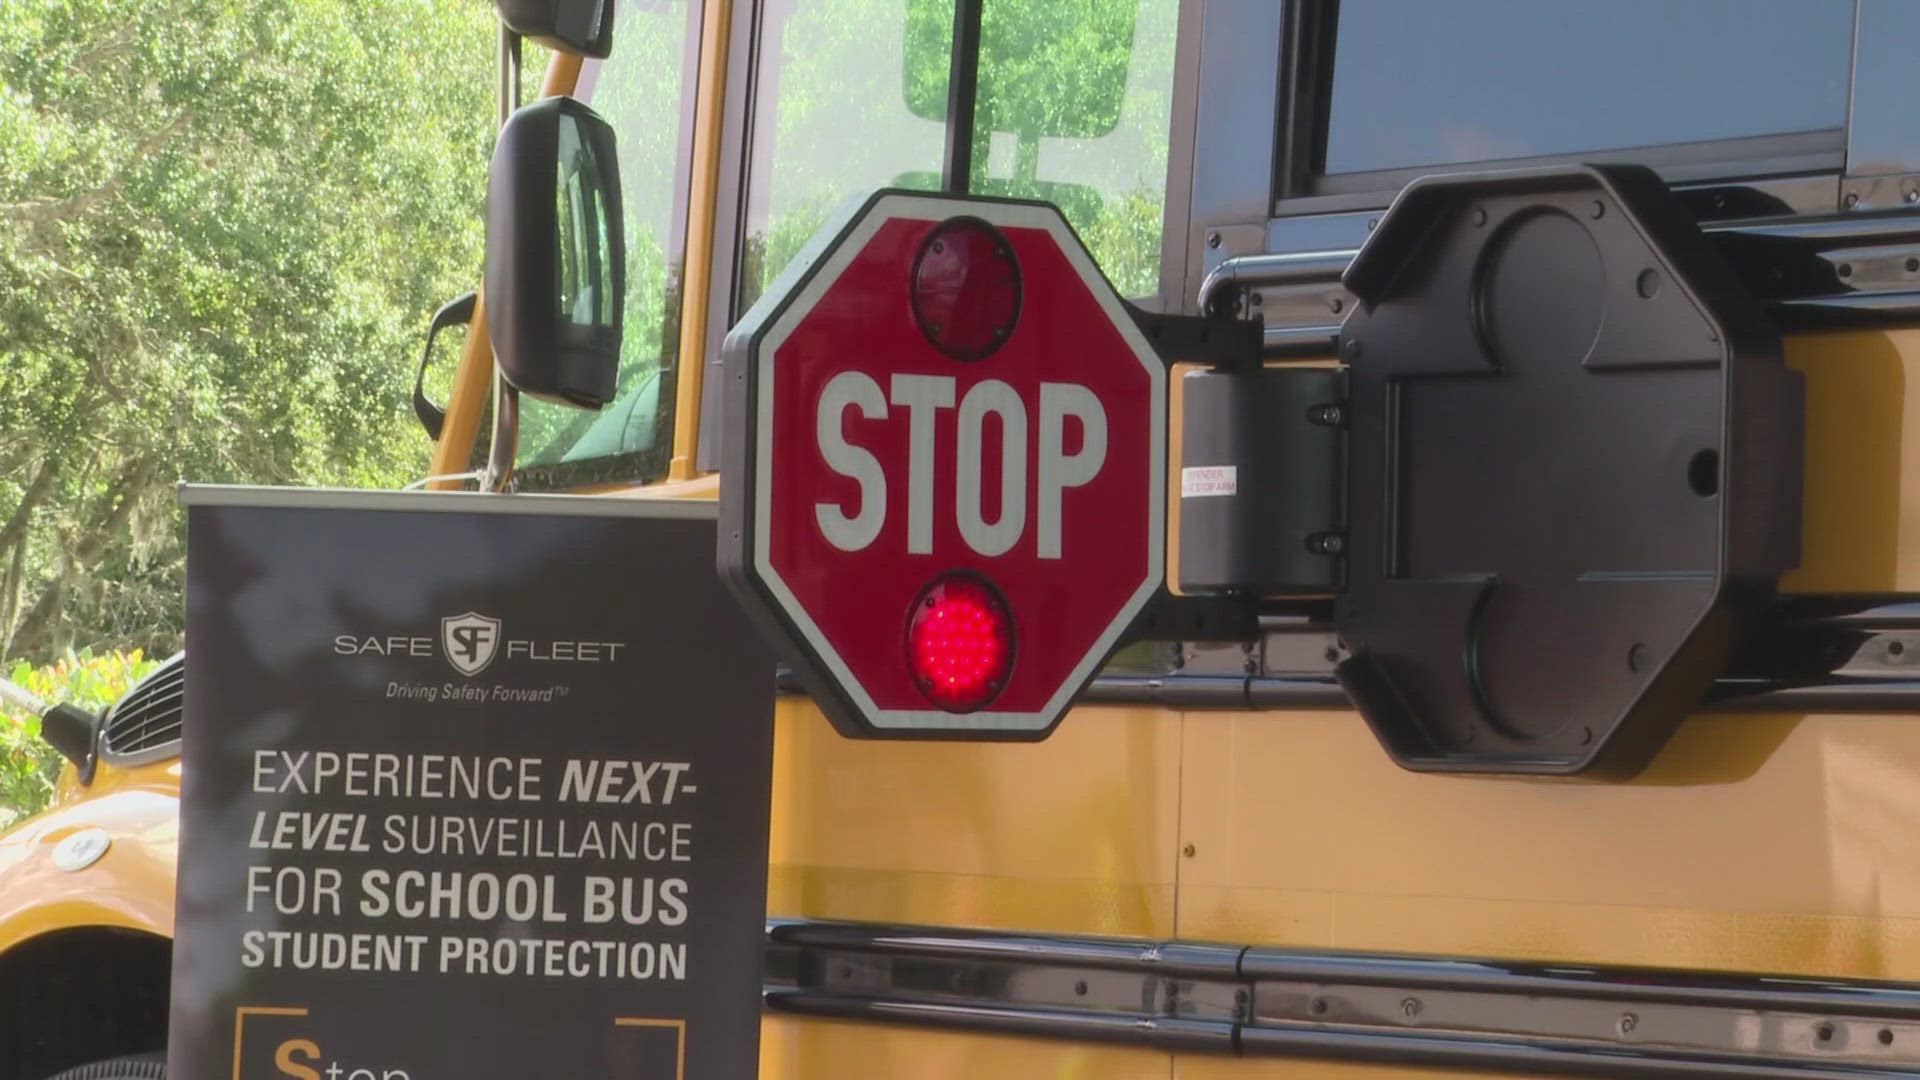 According to a national report, drivers illegally pass school buses more than 242,000 times a day nationally.